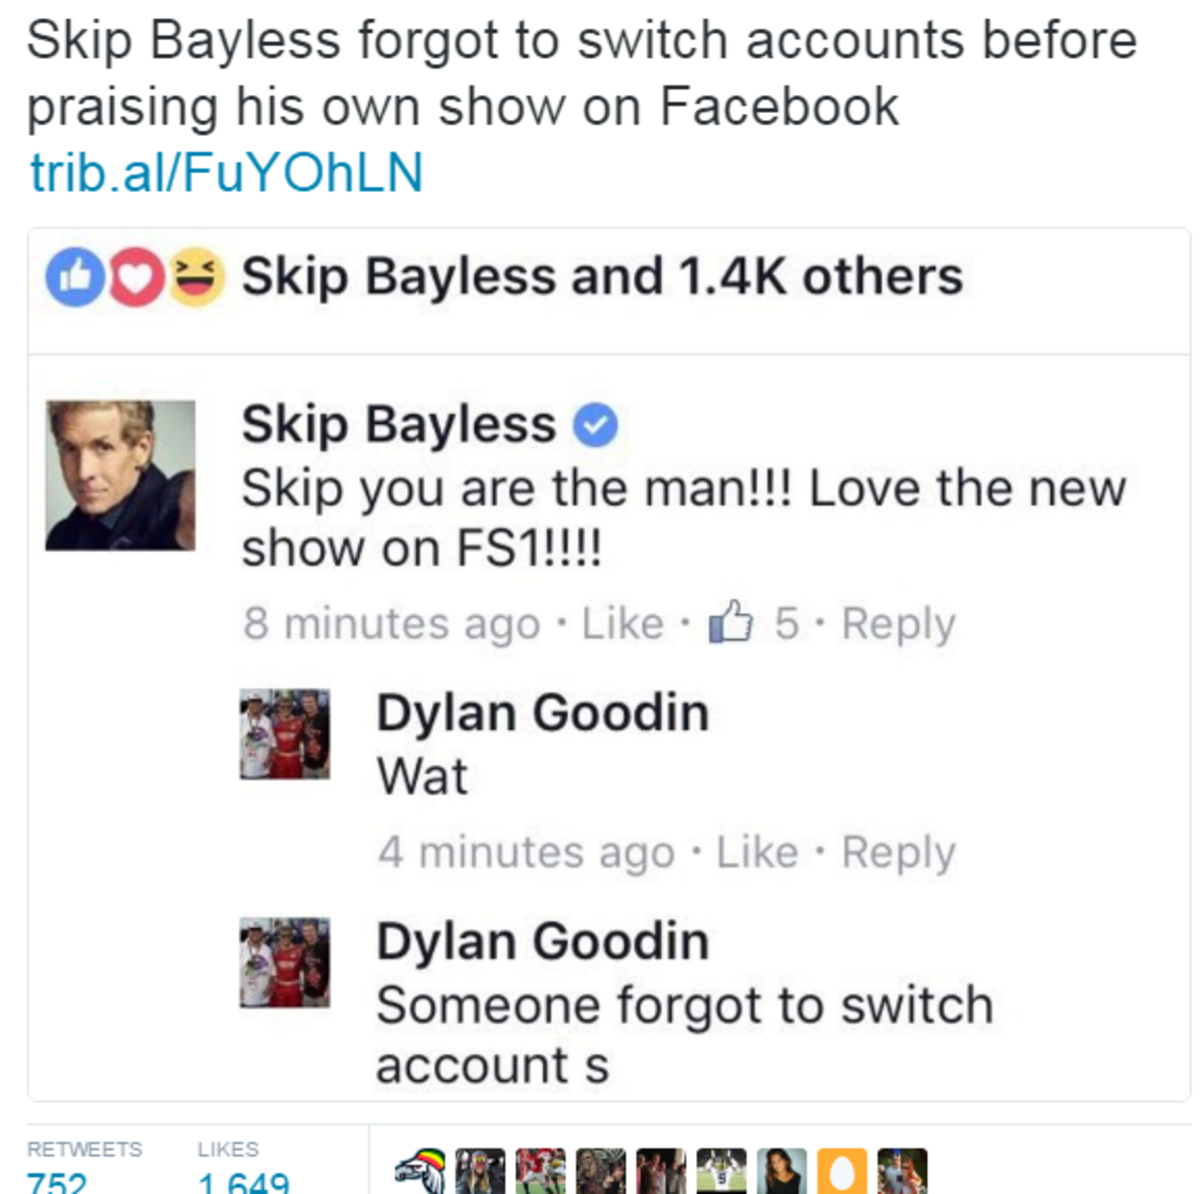 Skip Bayless Forgot To Switch Accounts On Facebook Before Praising His Own Show